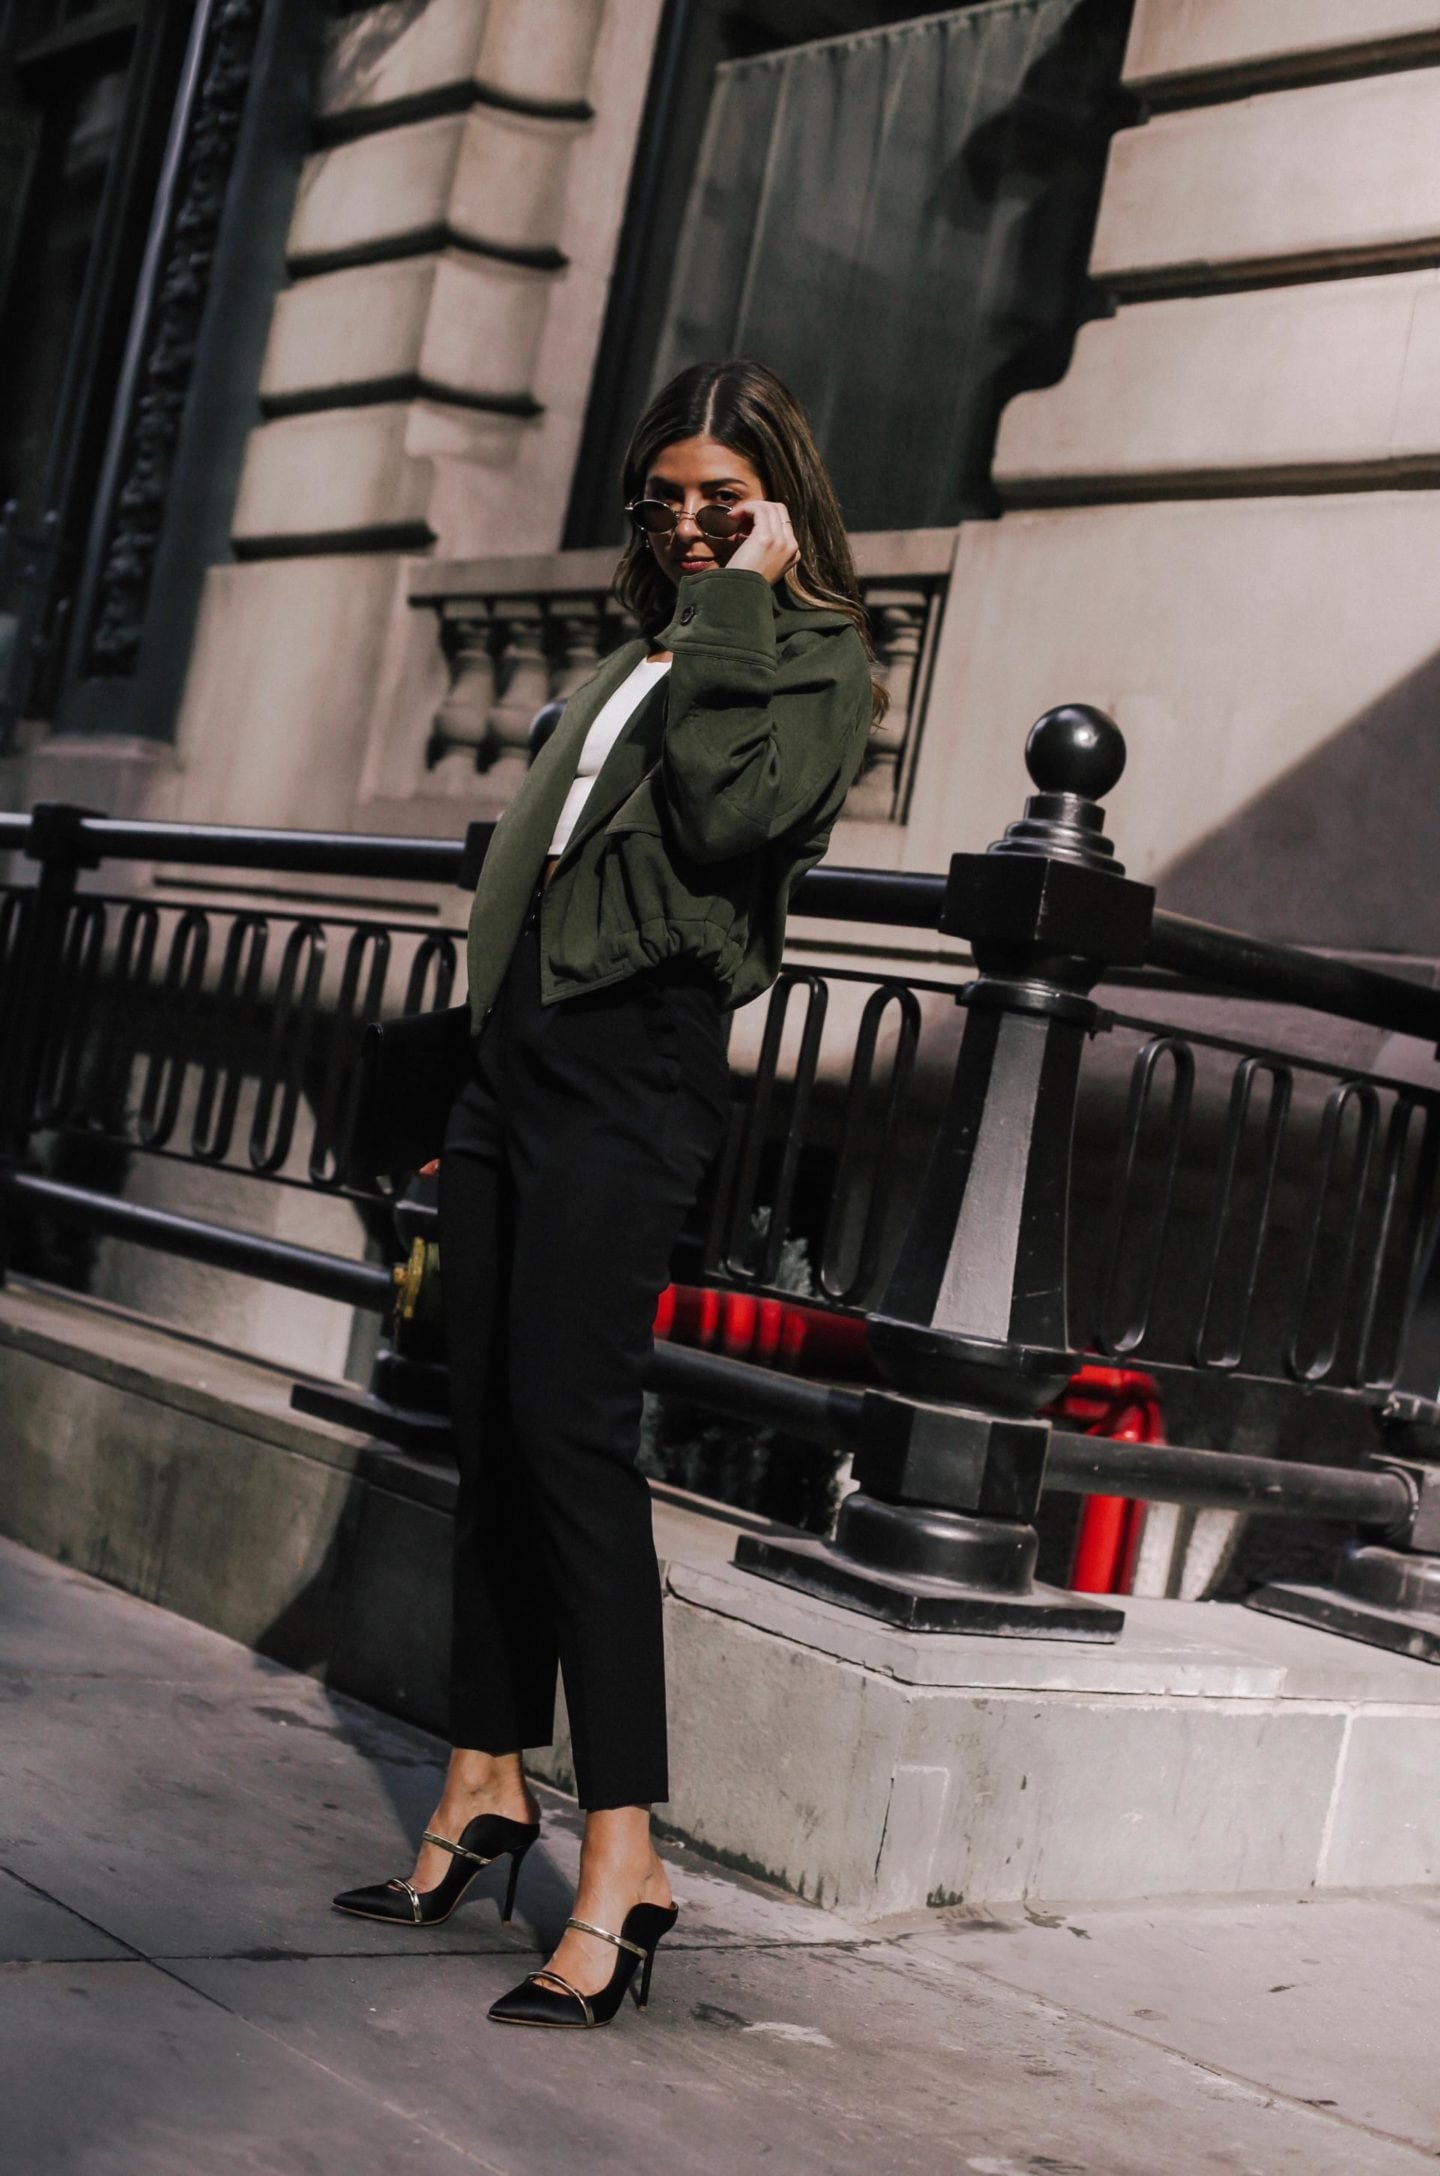 How to Recover After A Long Flight by Pam Hetlinger | TheGirlFromPanama.com | Chic style, vince olive green jacket, gigi barcelona sunnies, nyc style, la fashion blogger, malone souliers heels